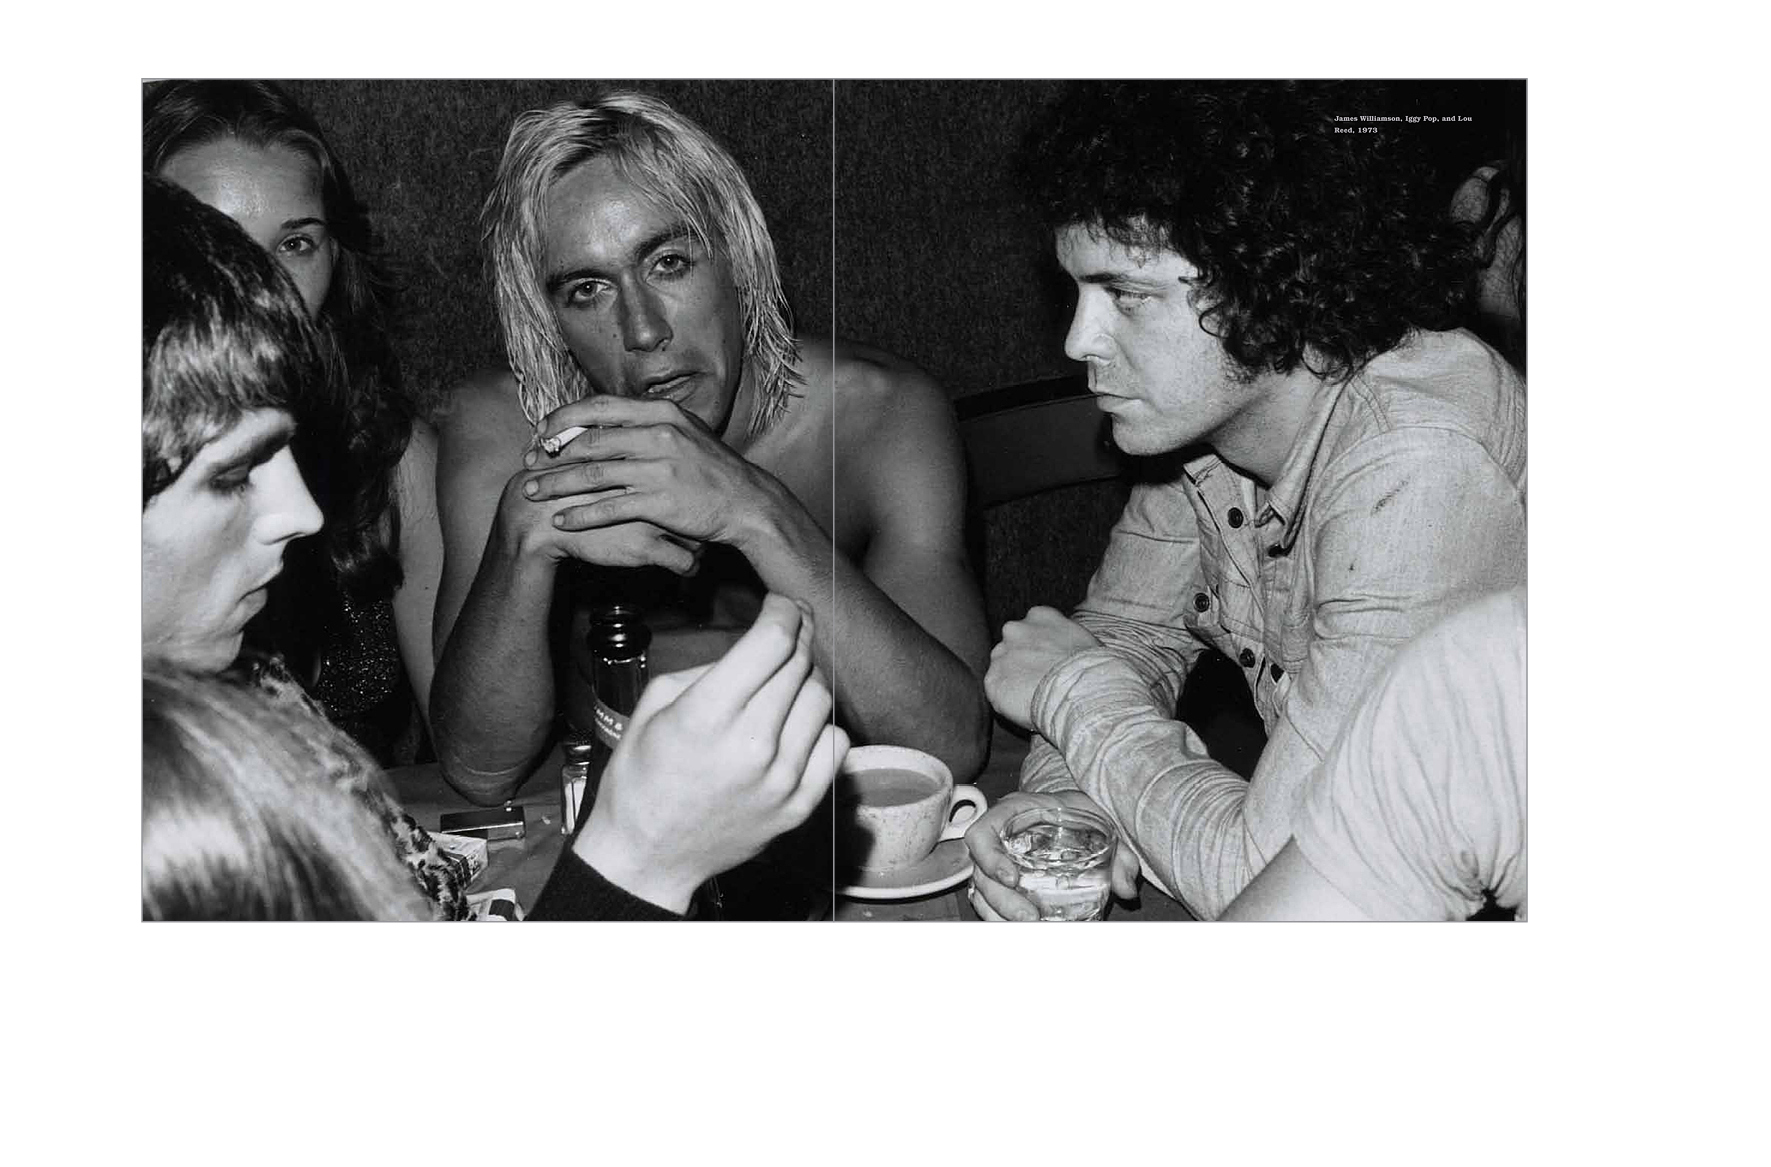   Typical spread -  Two-page image, Iggy Pop and Lou Reed     